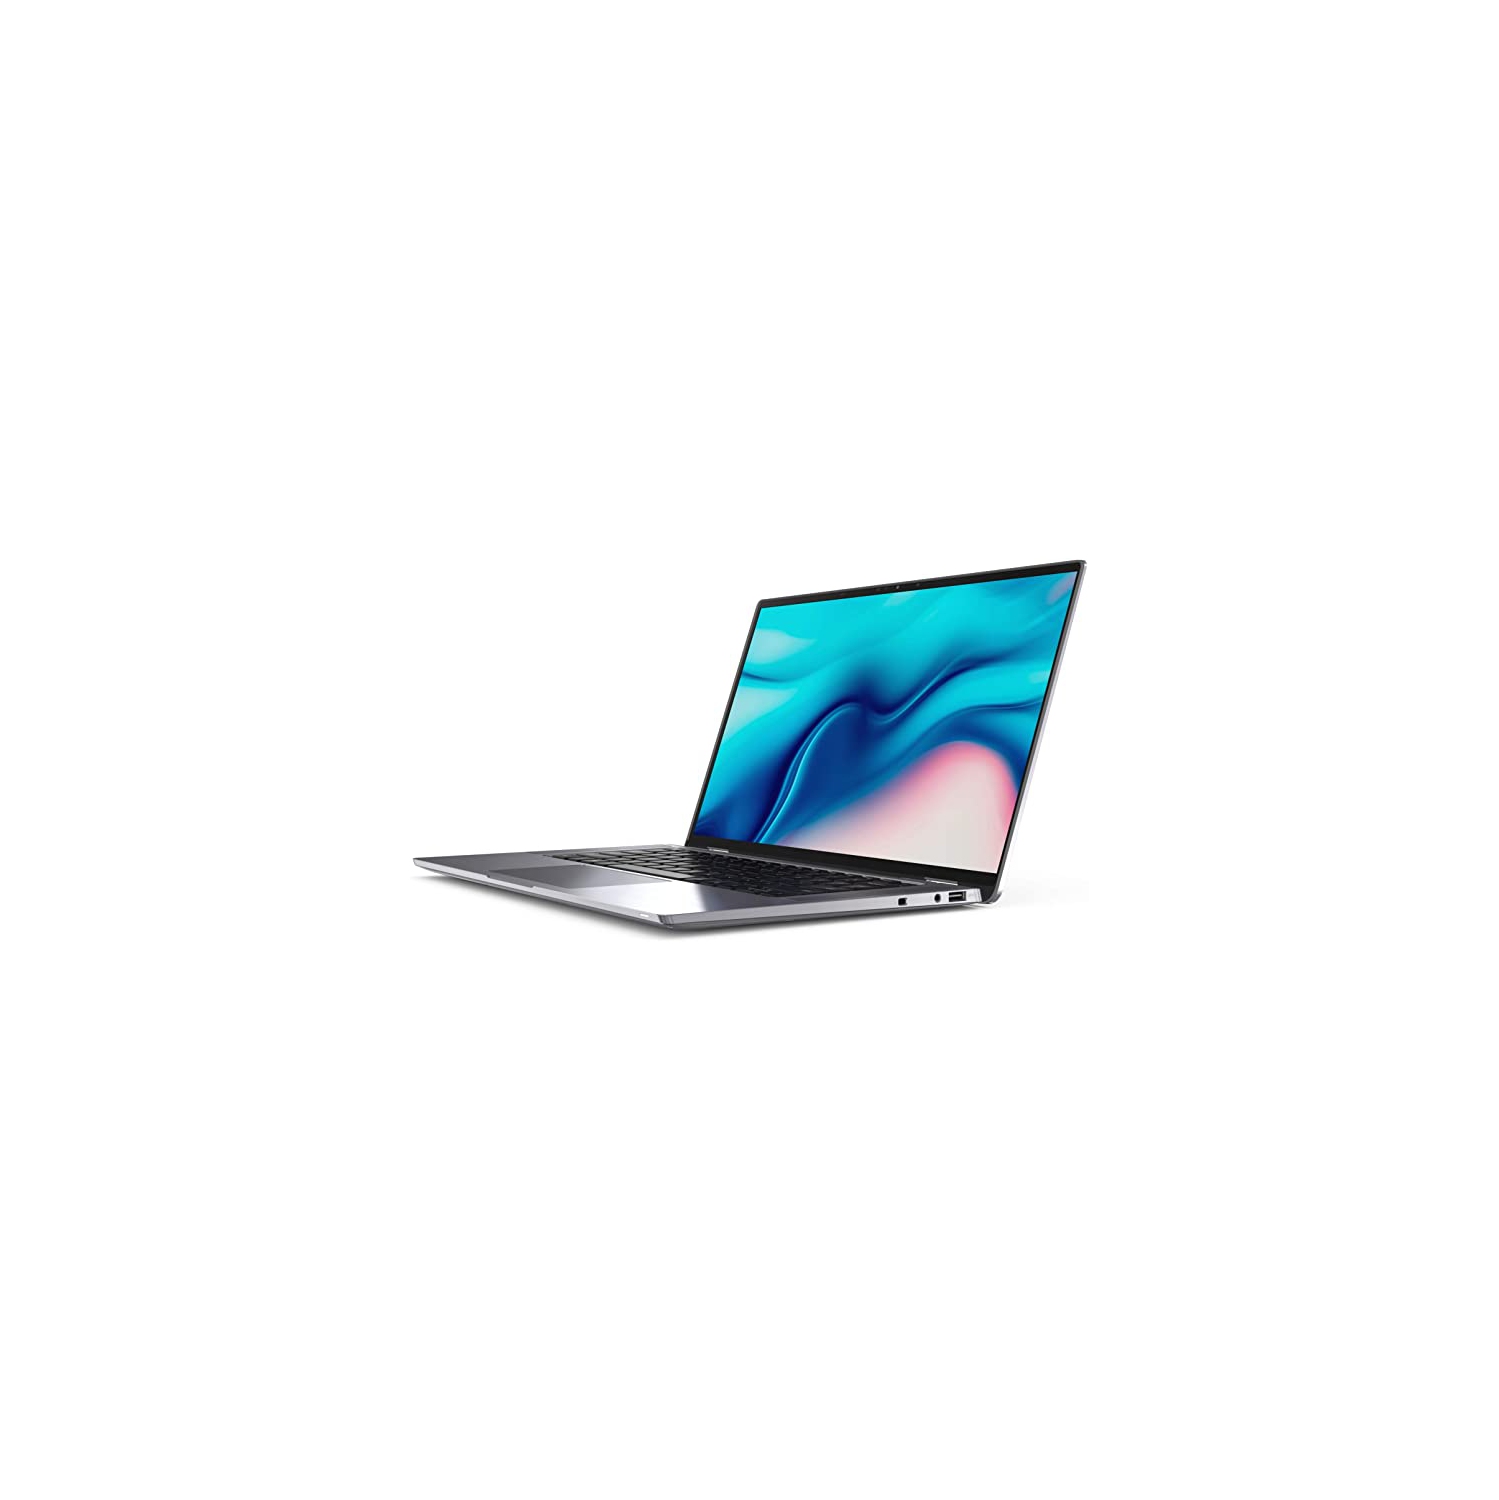 Refurbished (Excellent) - Dell Latitude 9000 9510 Laptop (2020) | 15.6" FHD | Core i7 - 1TB SSD - 8GB RAM | 4 Cores @ 4.9 GHz - 10th Gen CPU Certified Refurbished